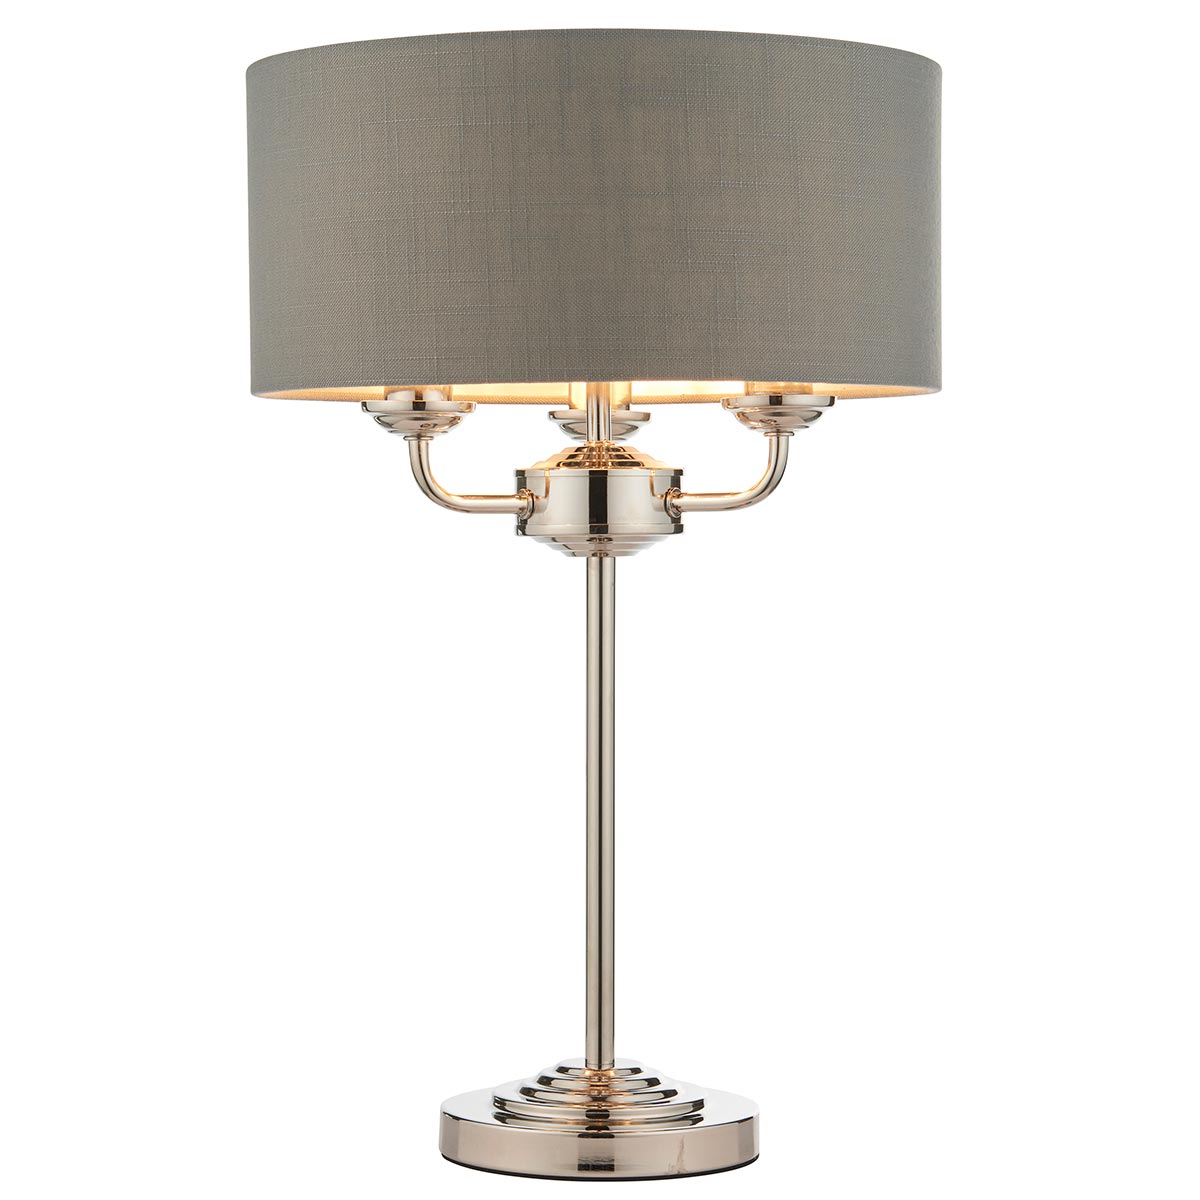 Highclere 3 Light Table Lamp Polished Nickel Charcoal Shade